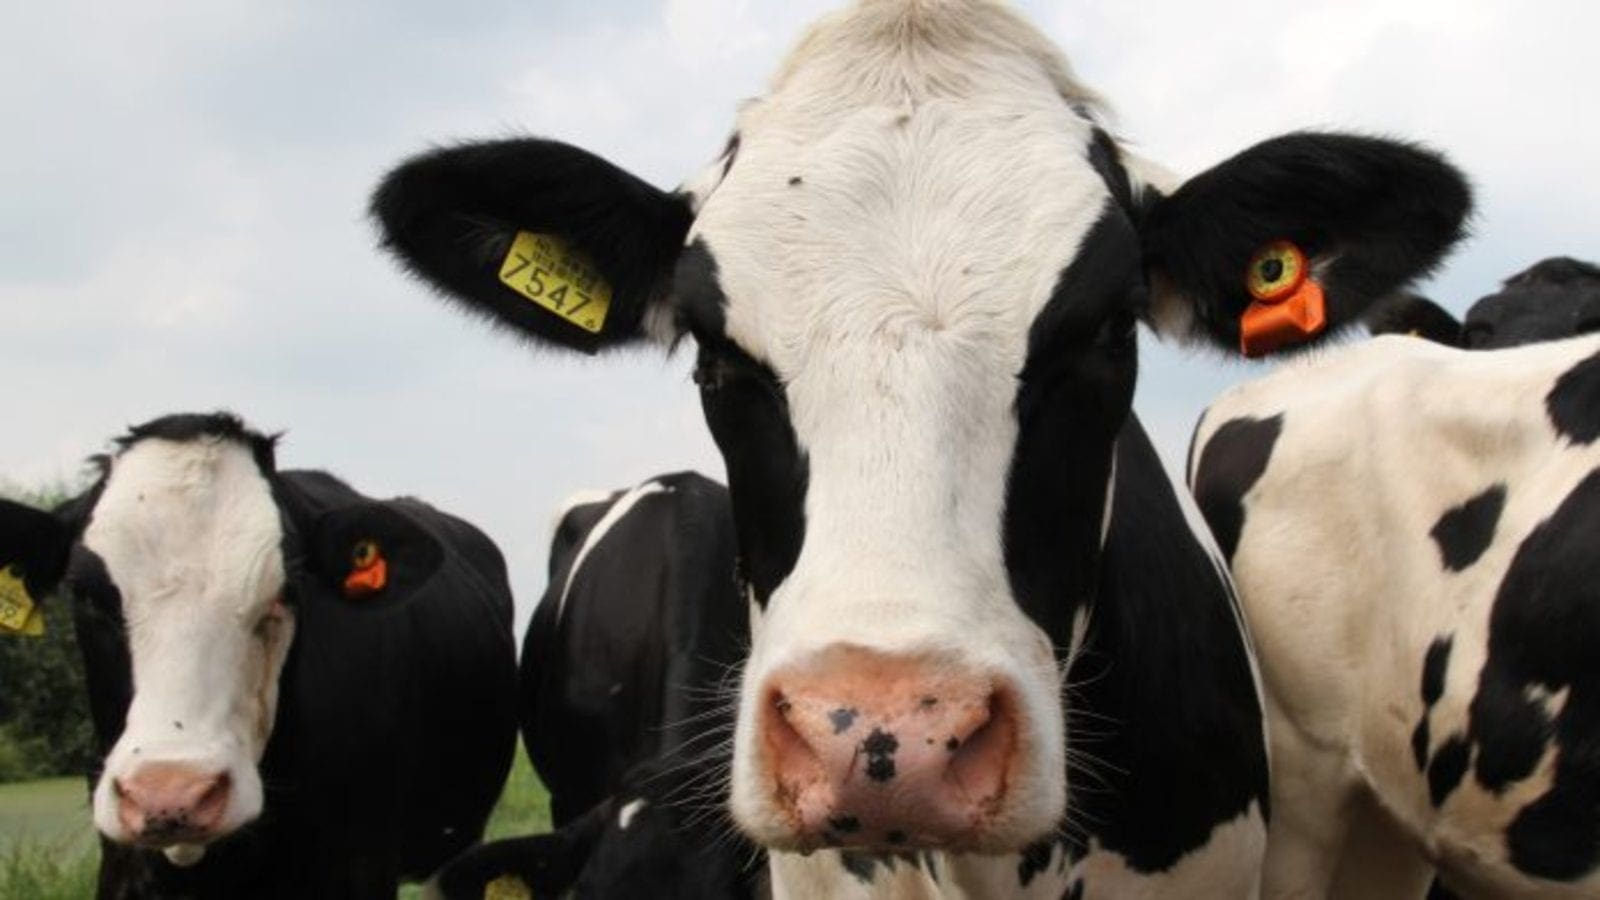 Arla Foods UK sets new rules for organic famers as it targets to grow milk production by 50%